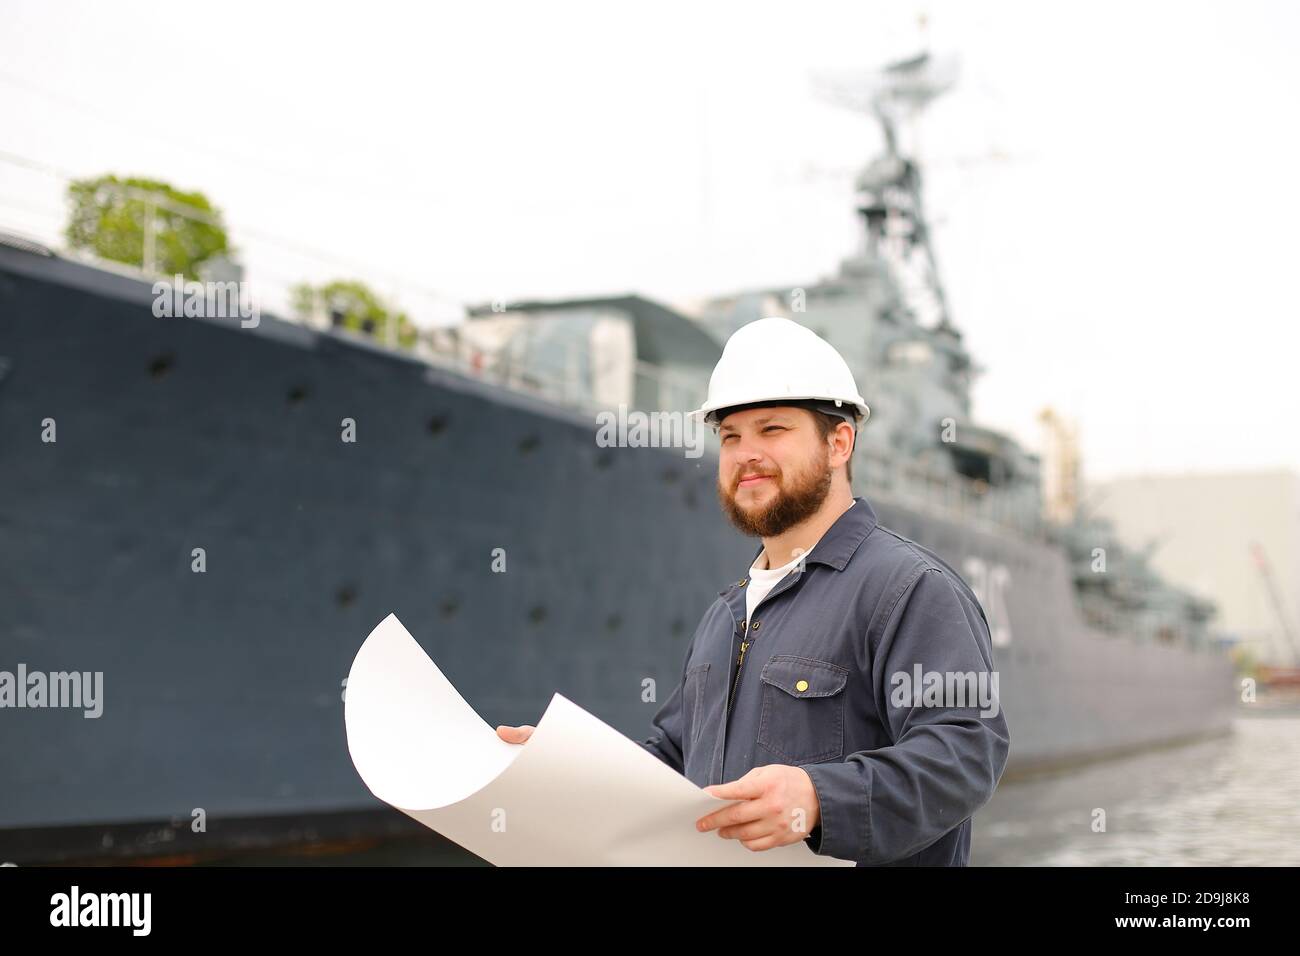 Maritime captain reading documents and standing near vessel. Stock Photo